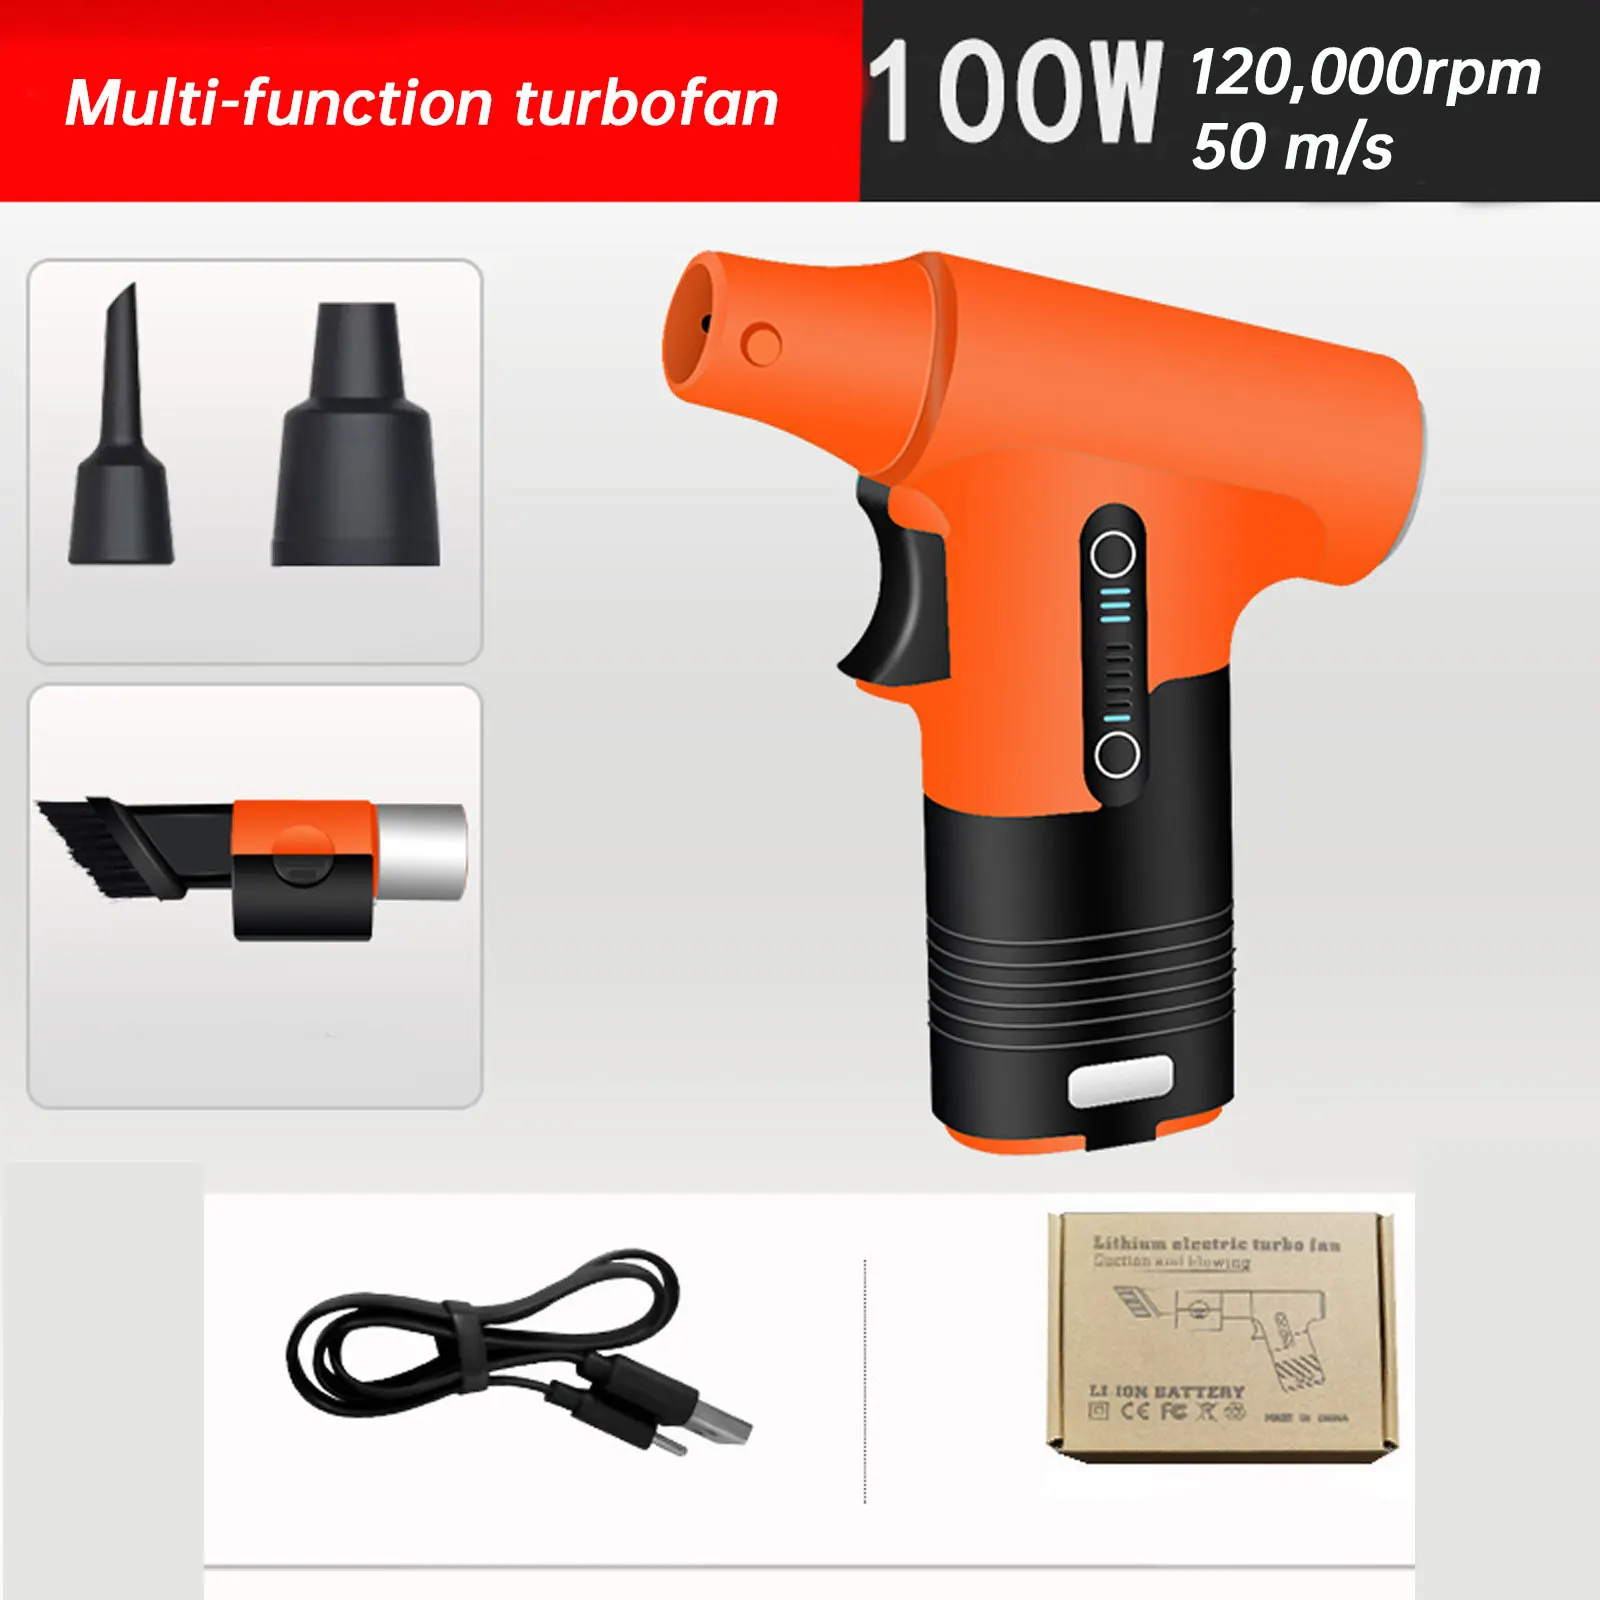 Brushless Motor Jet Fan 120,000RPM Turbofan High Power Dust Blower Compressed Air Duster Keyboard Cleaning Tool Type-C Interface brushless motor jet fan 120 000rpm turbofan high power dust blower compressed air duster keyboard cleaning tool type c interface